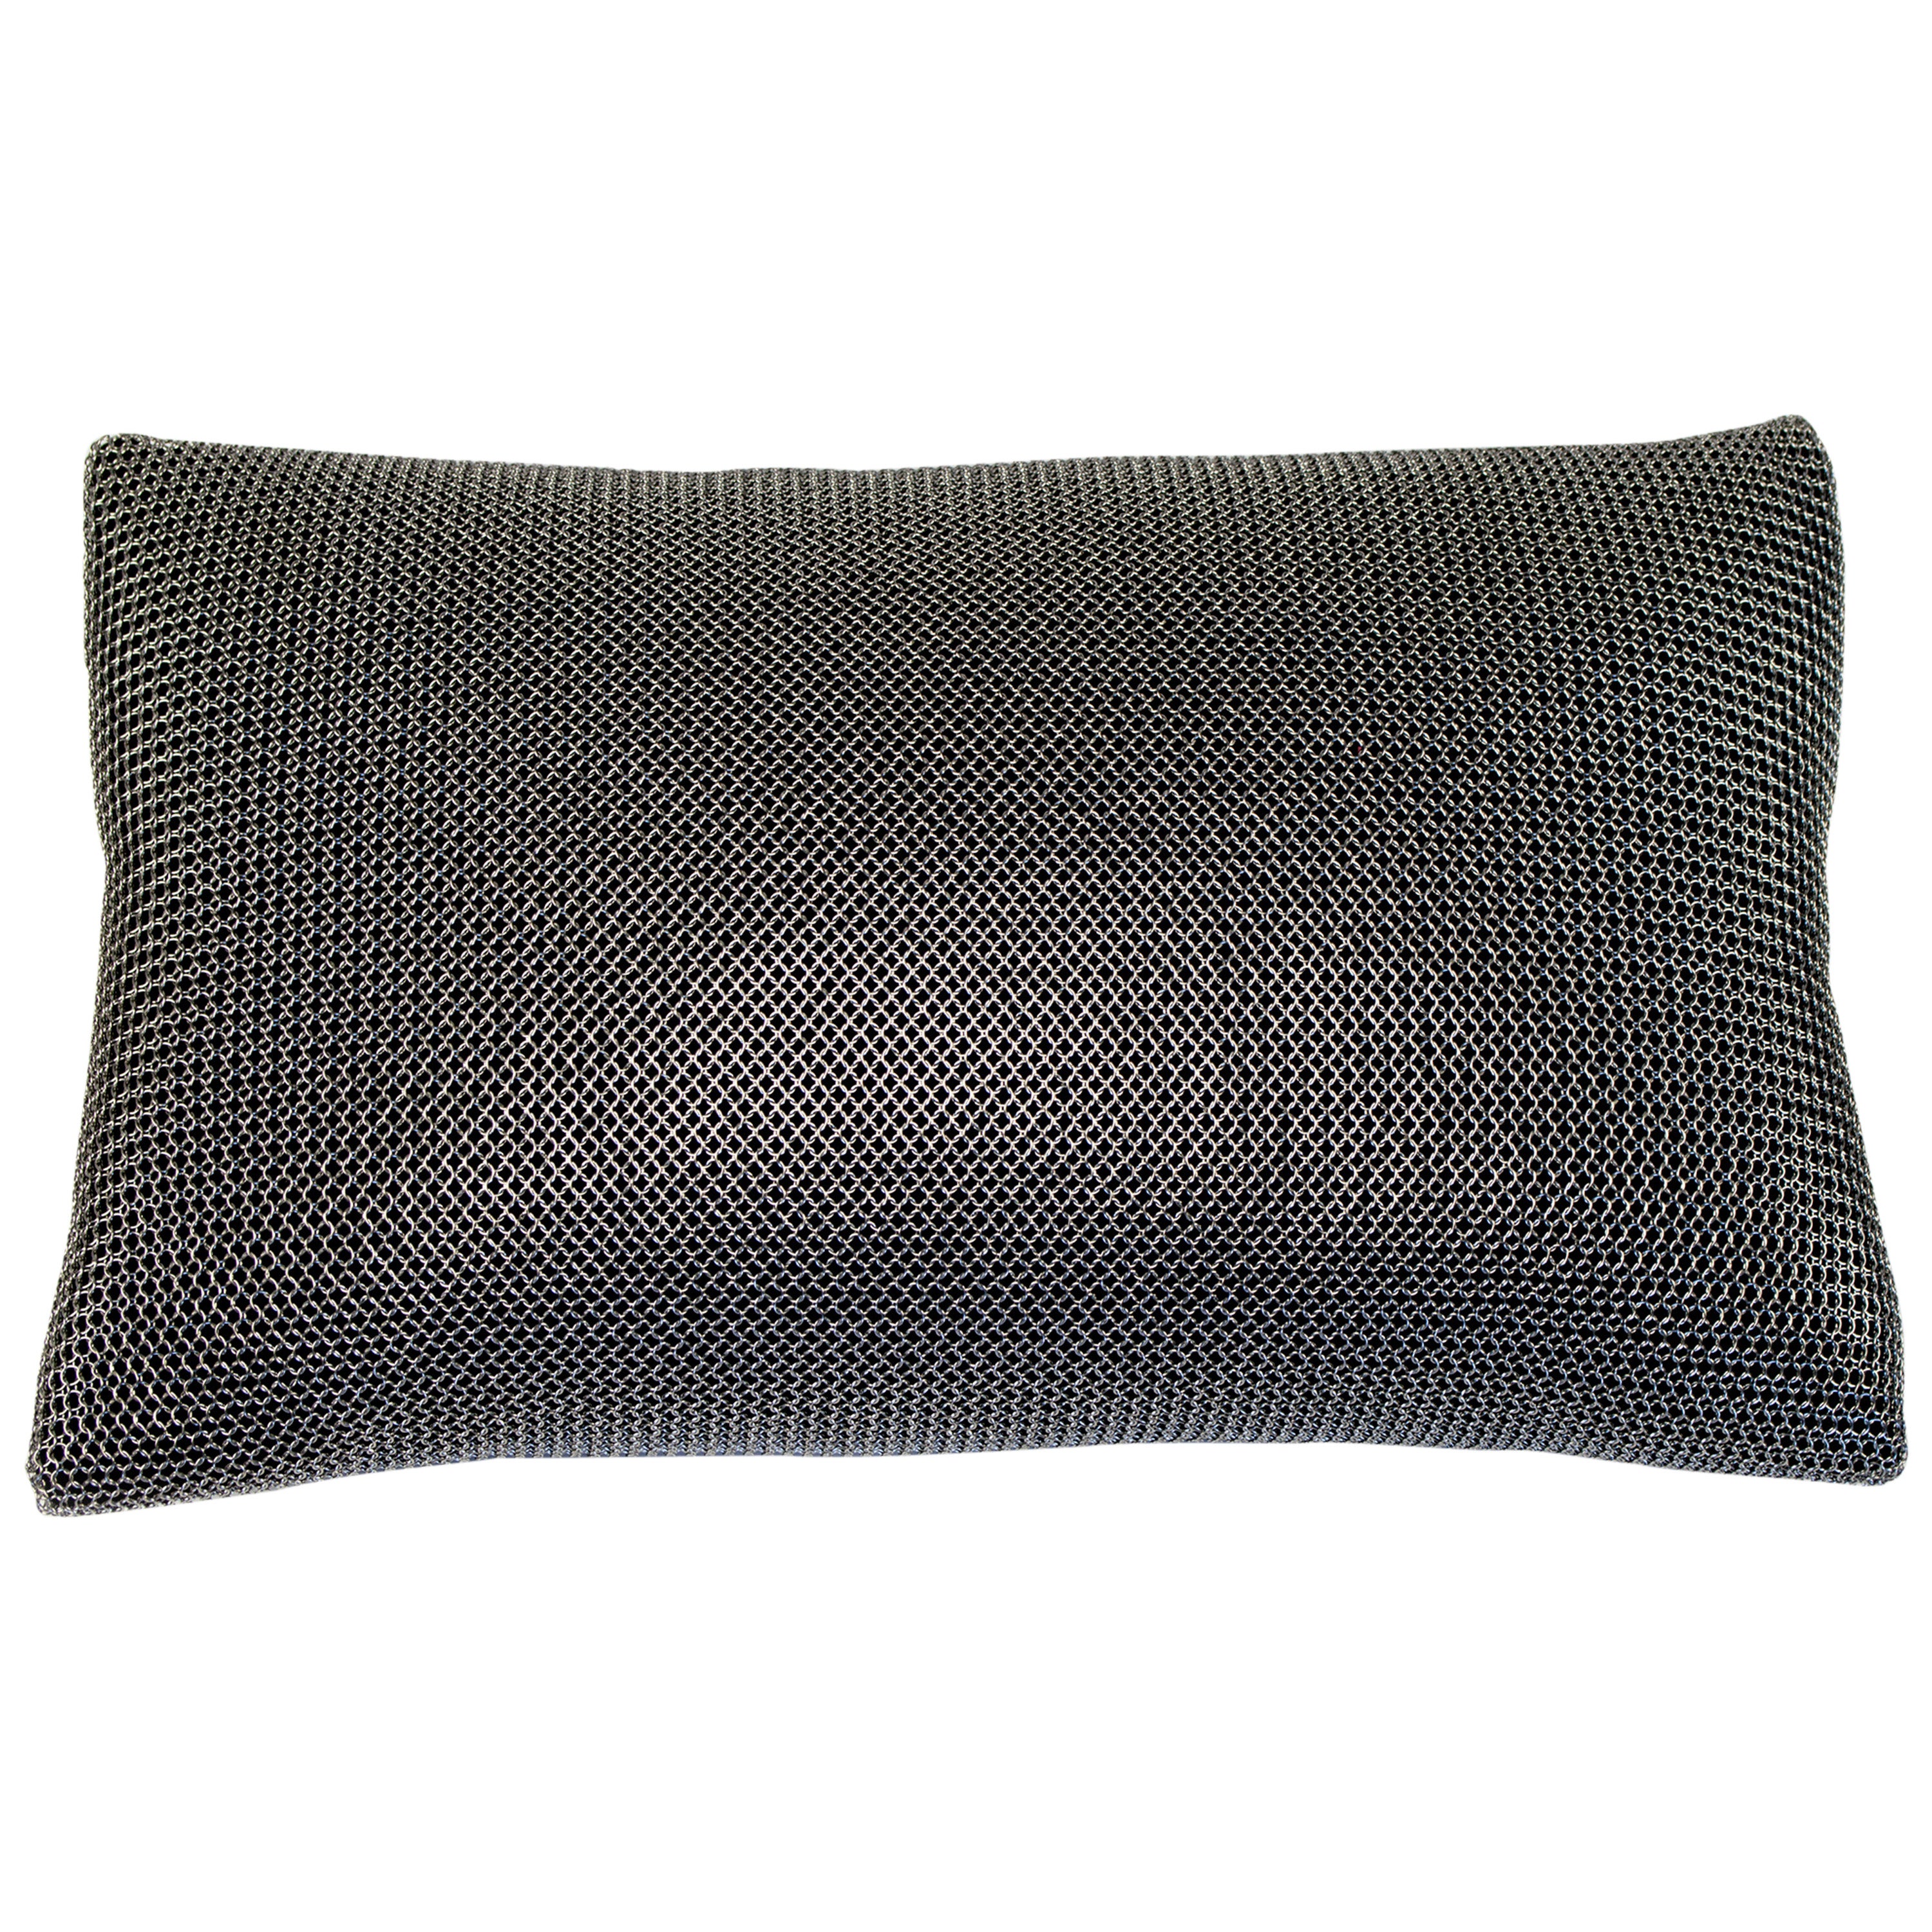 Chain Mail Pillow